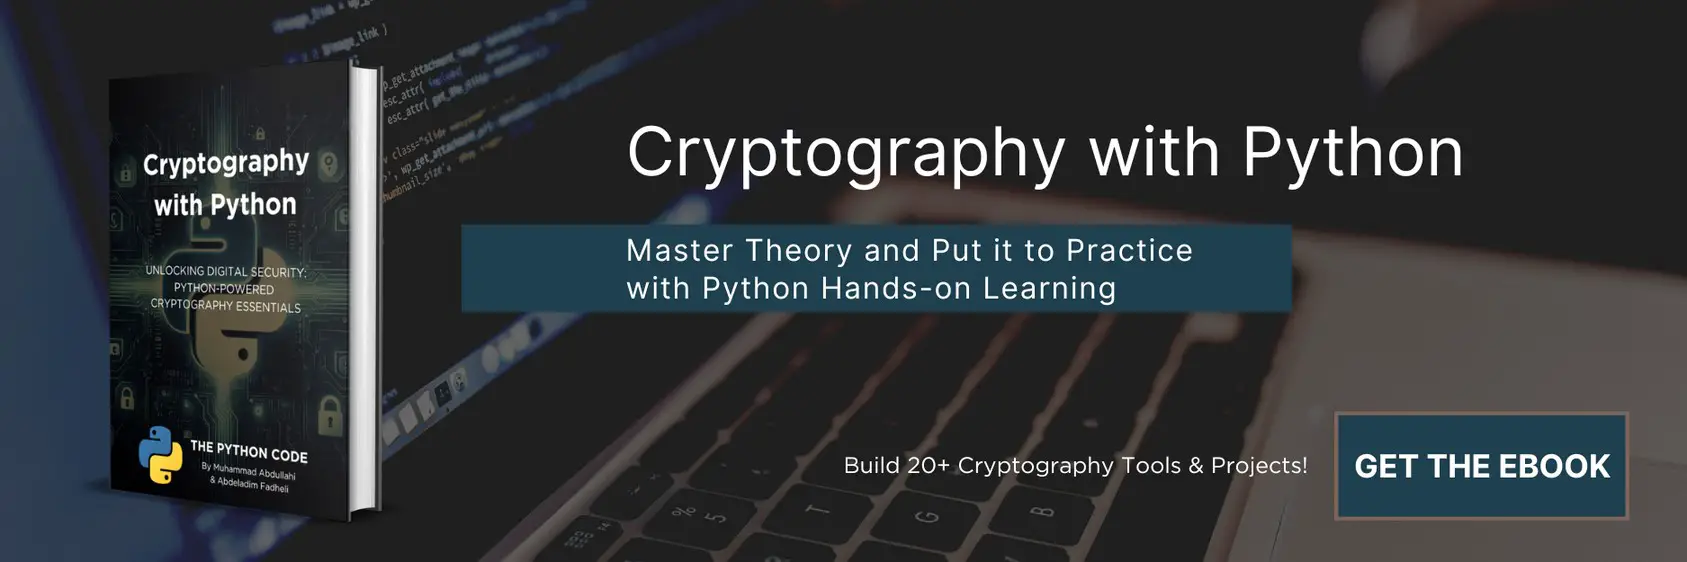 Cryptography with Python eBook